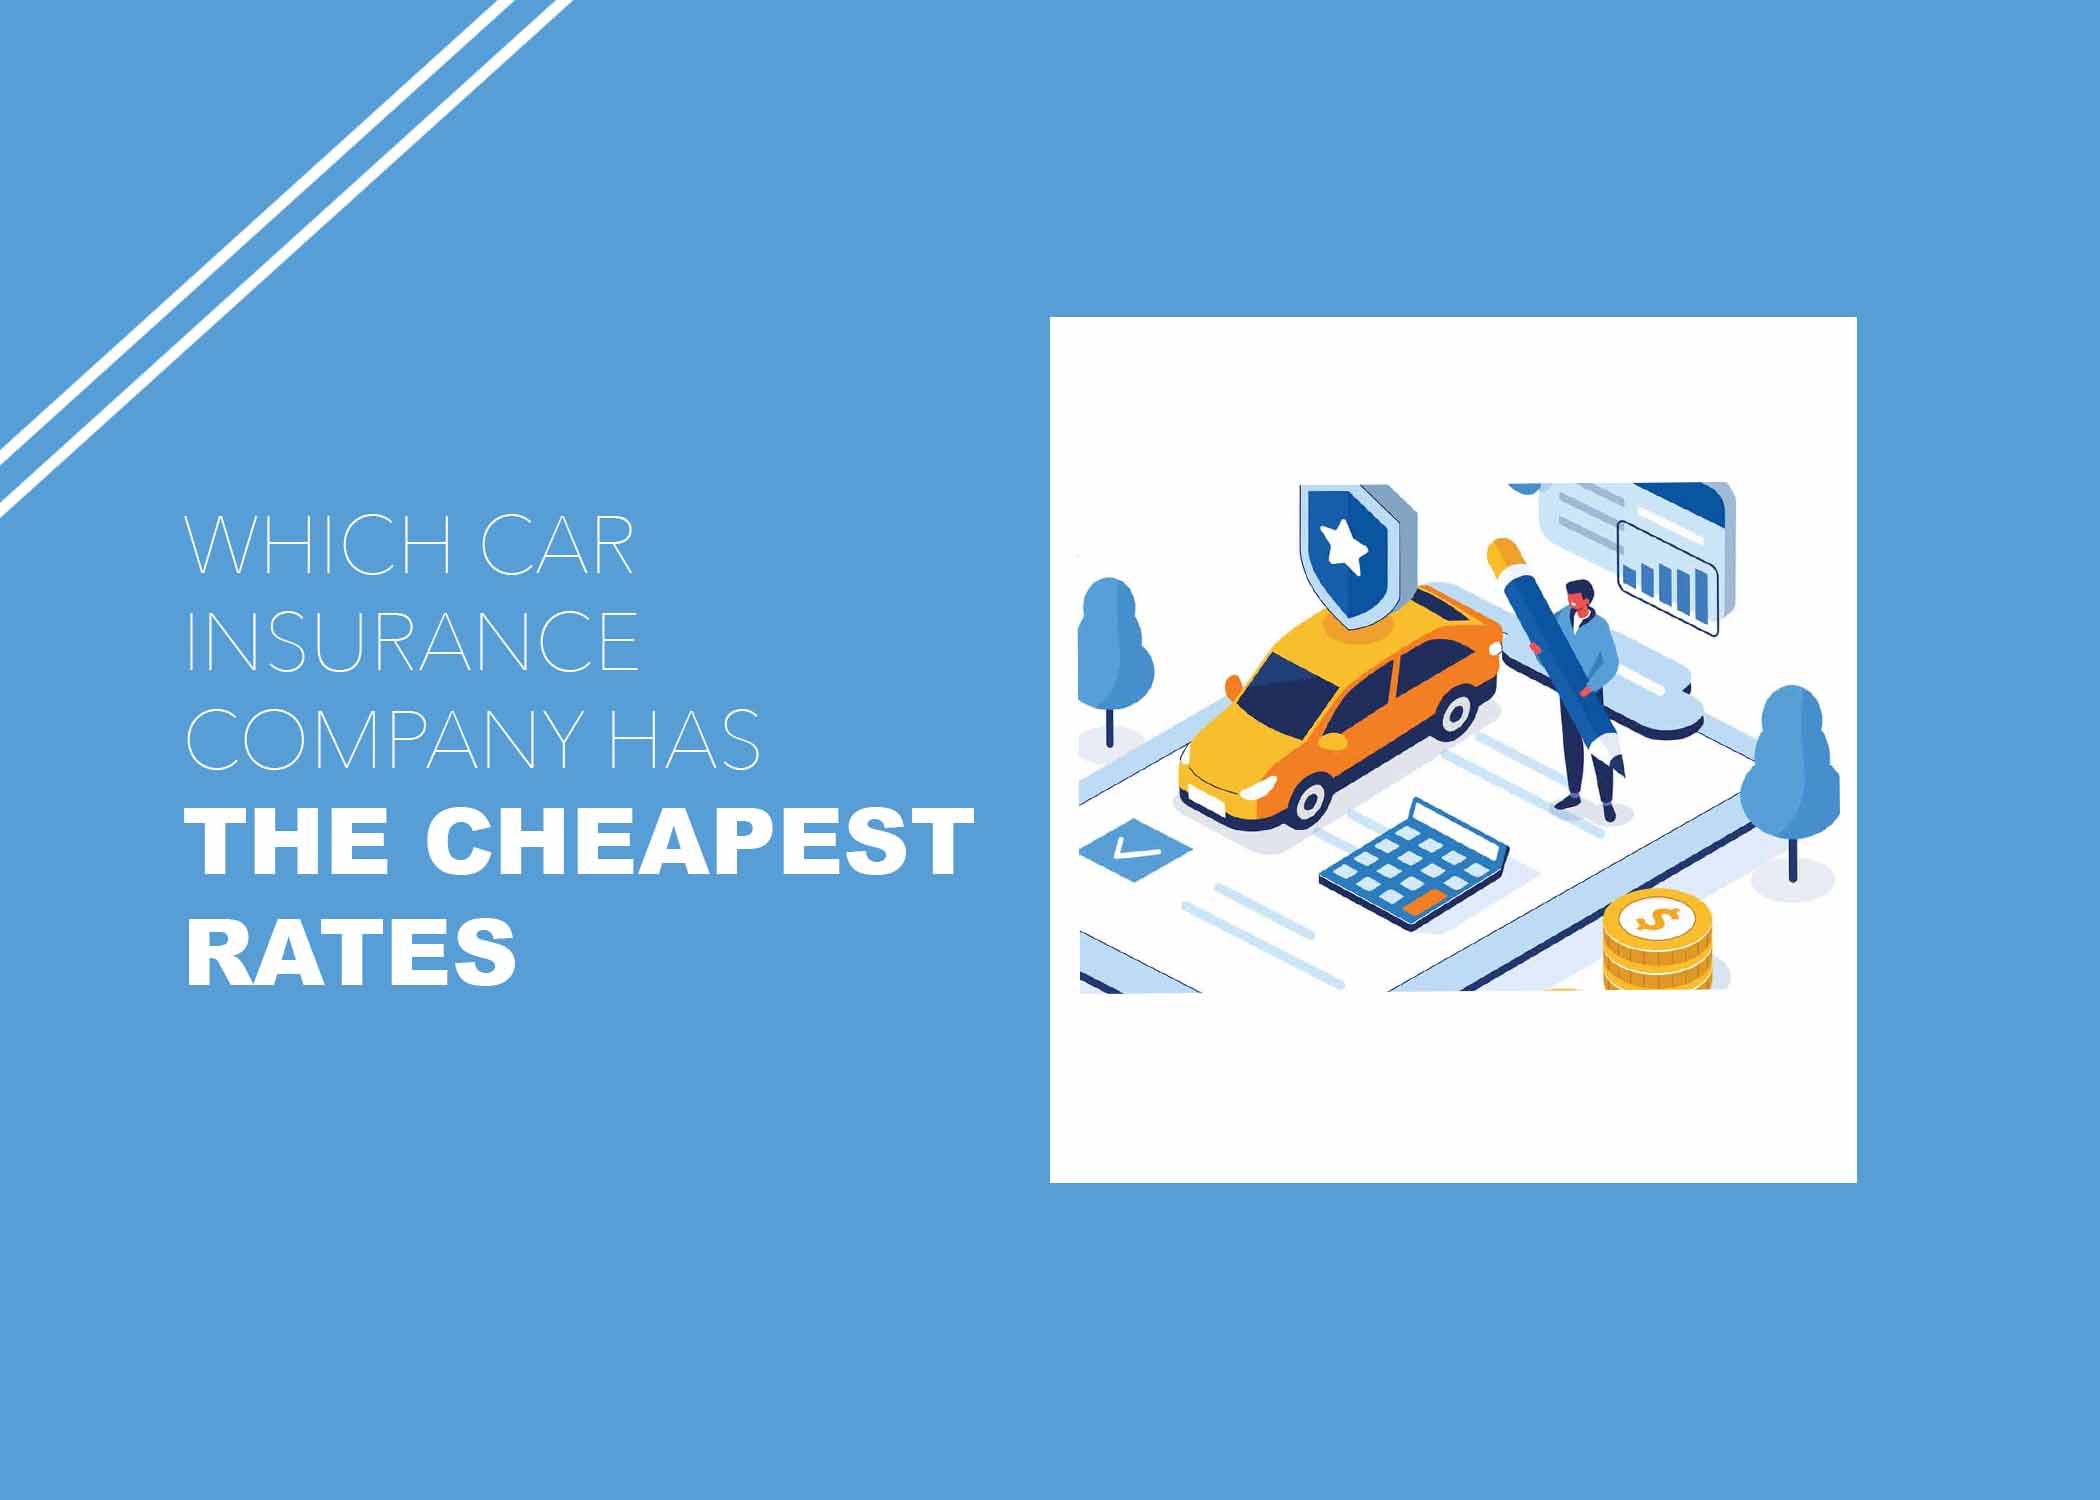 Which Car Insurance Company has the Cheapest Rates?